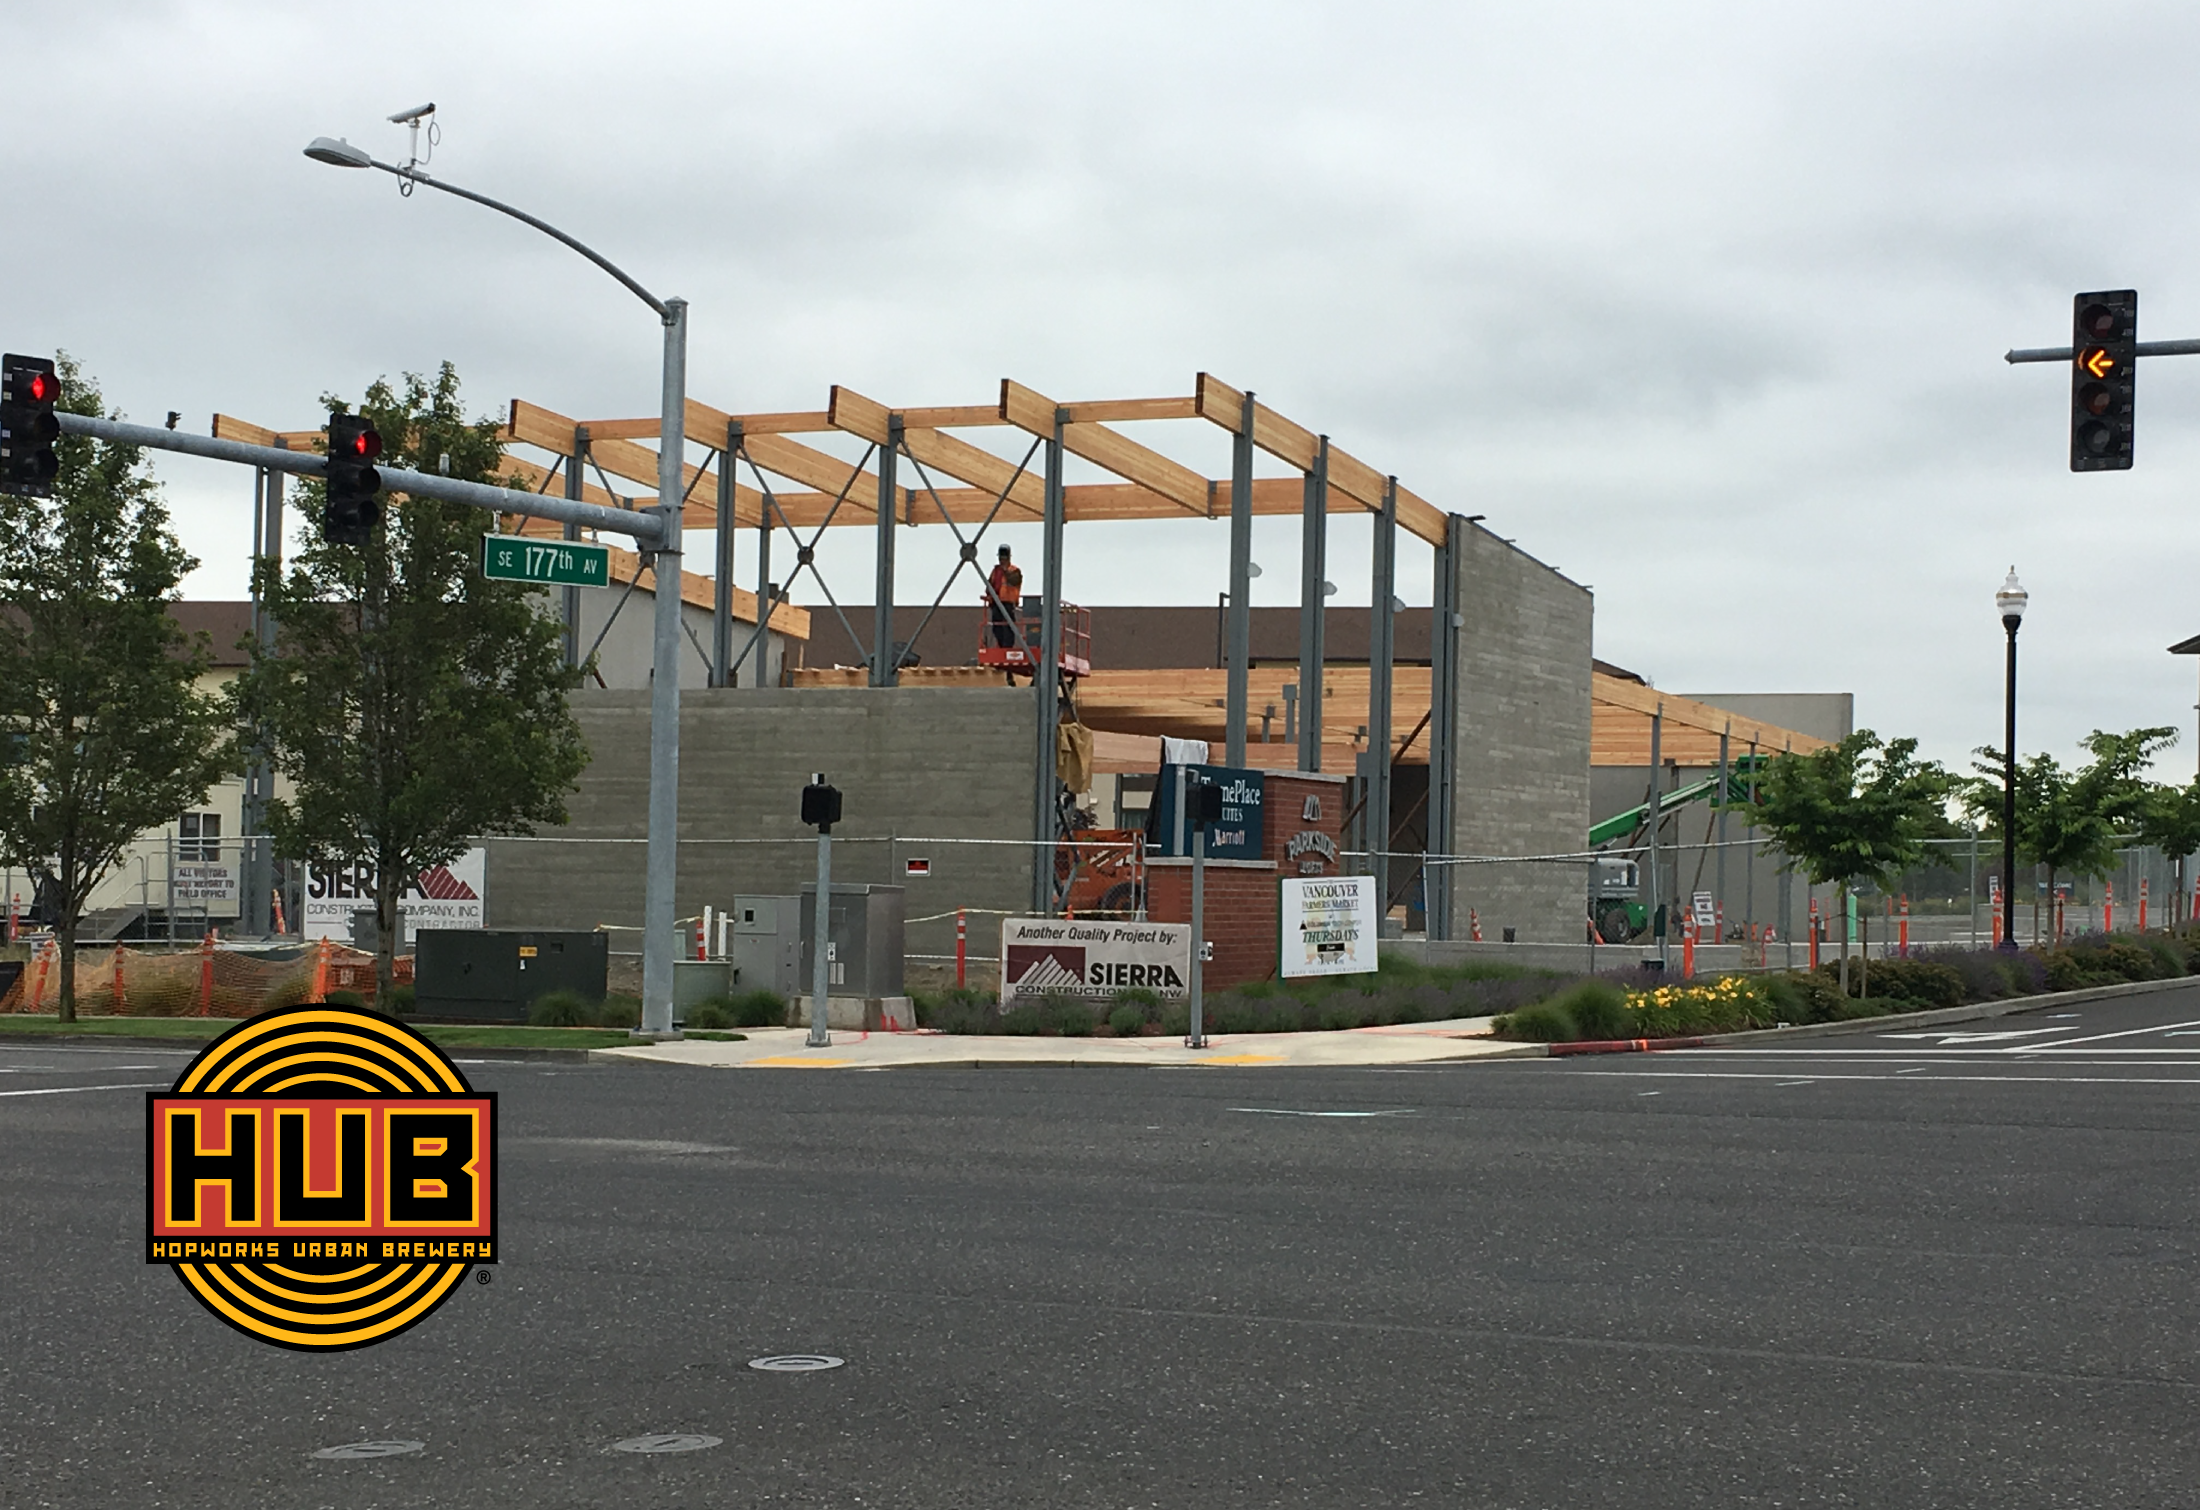 Construction progress of the new Hopworks Urban Brewery location in Vancouver, Washington. (image courtesy of Siteworks)